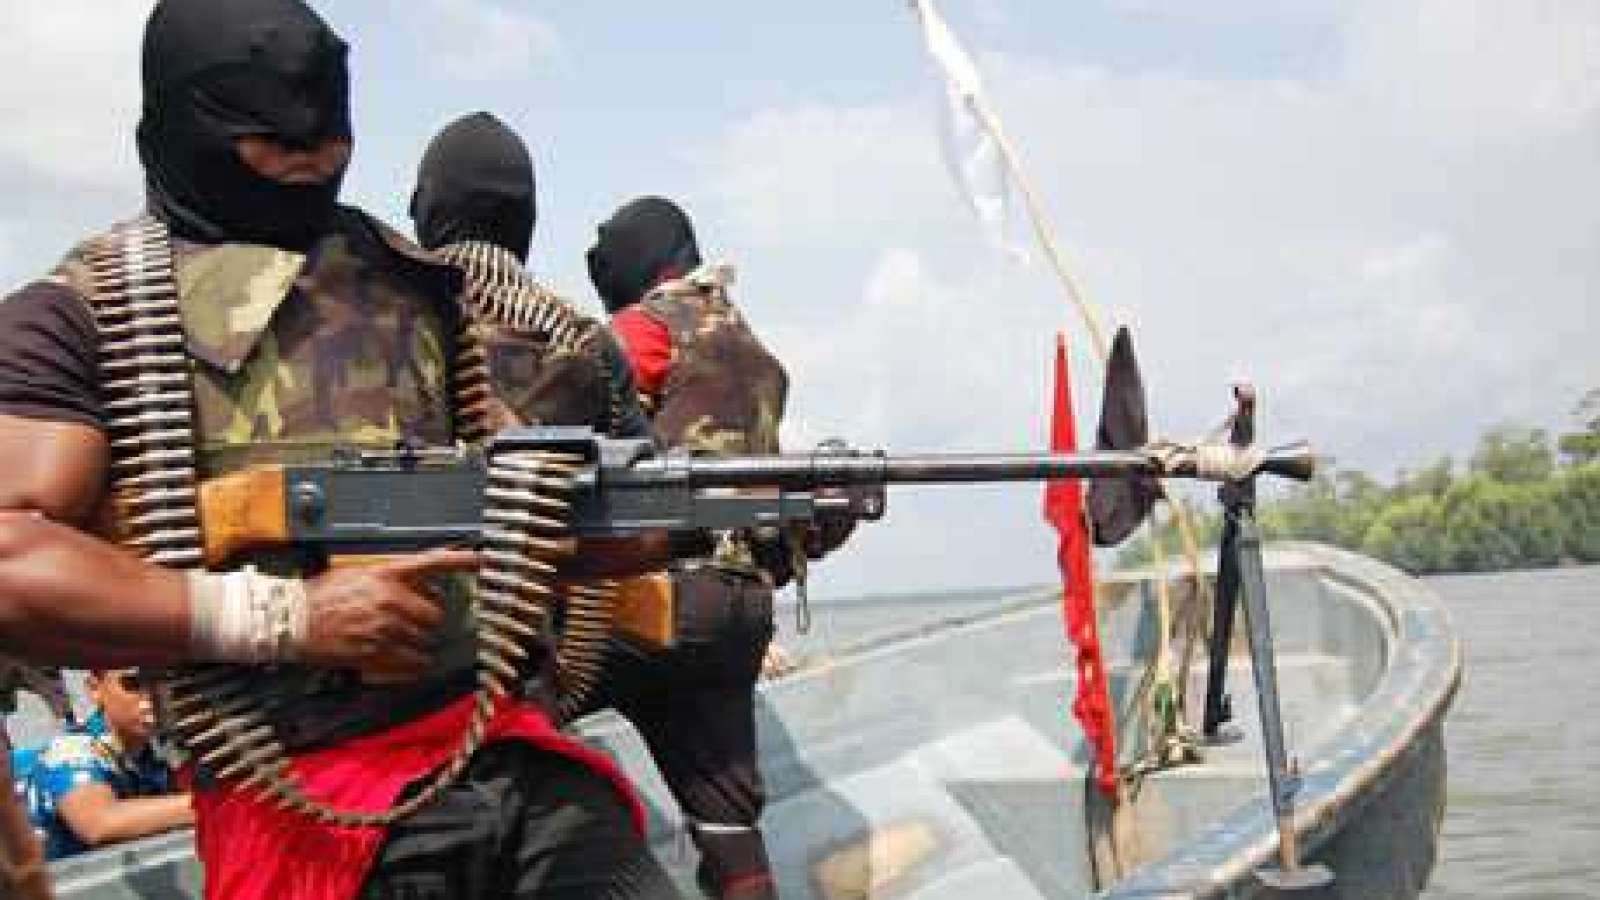 aniger delta avengers gives insight on oil sabotage